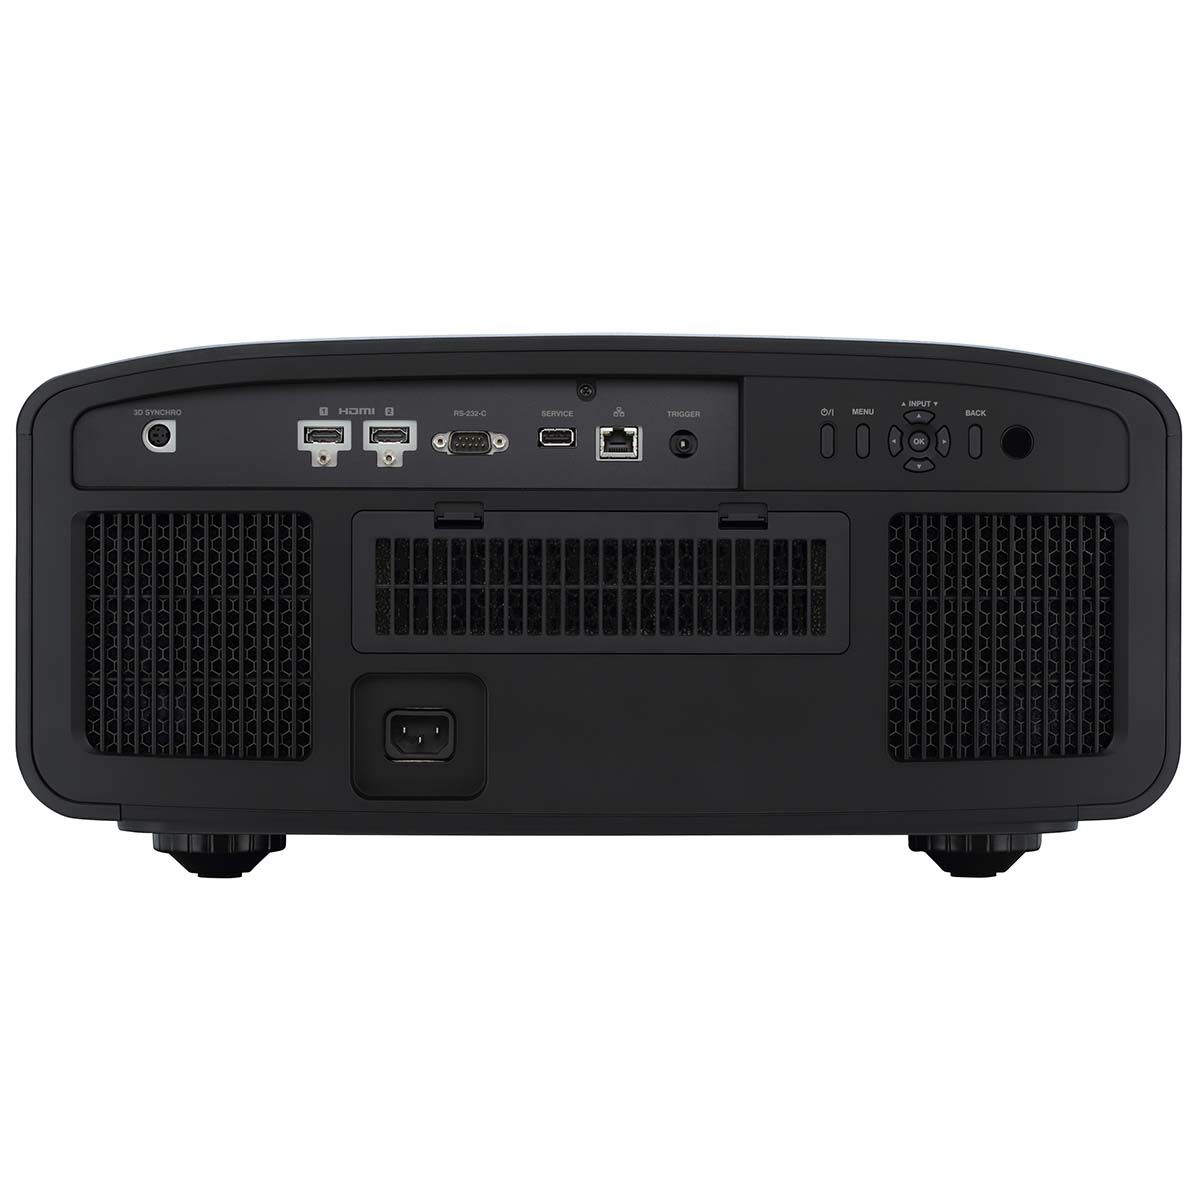 JVC DLA-NP5 4K Home Theater Projector, rear panel view